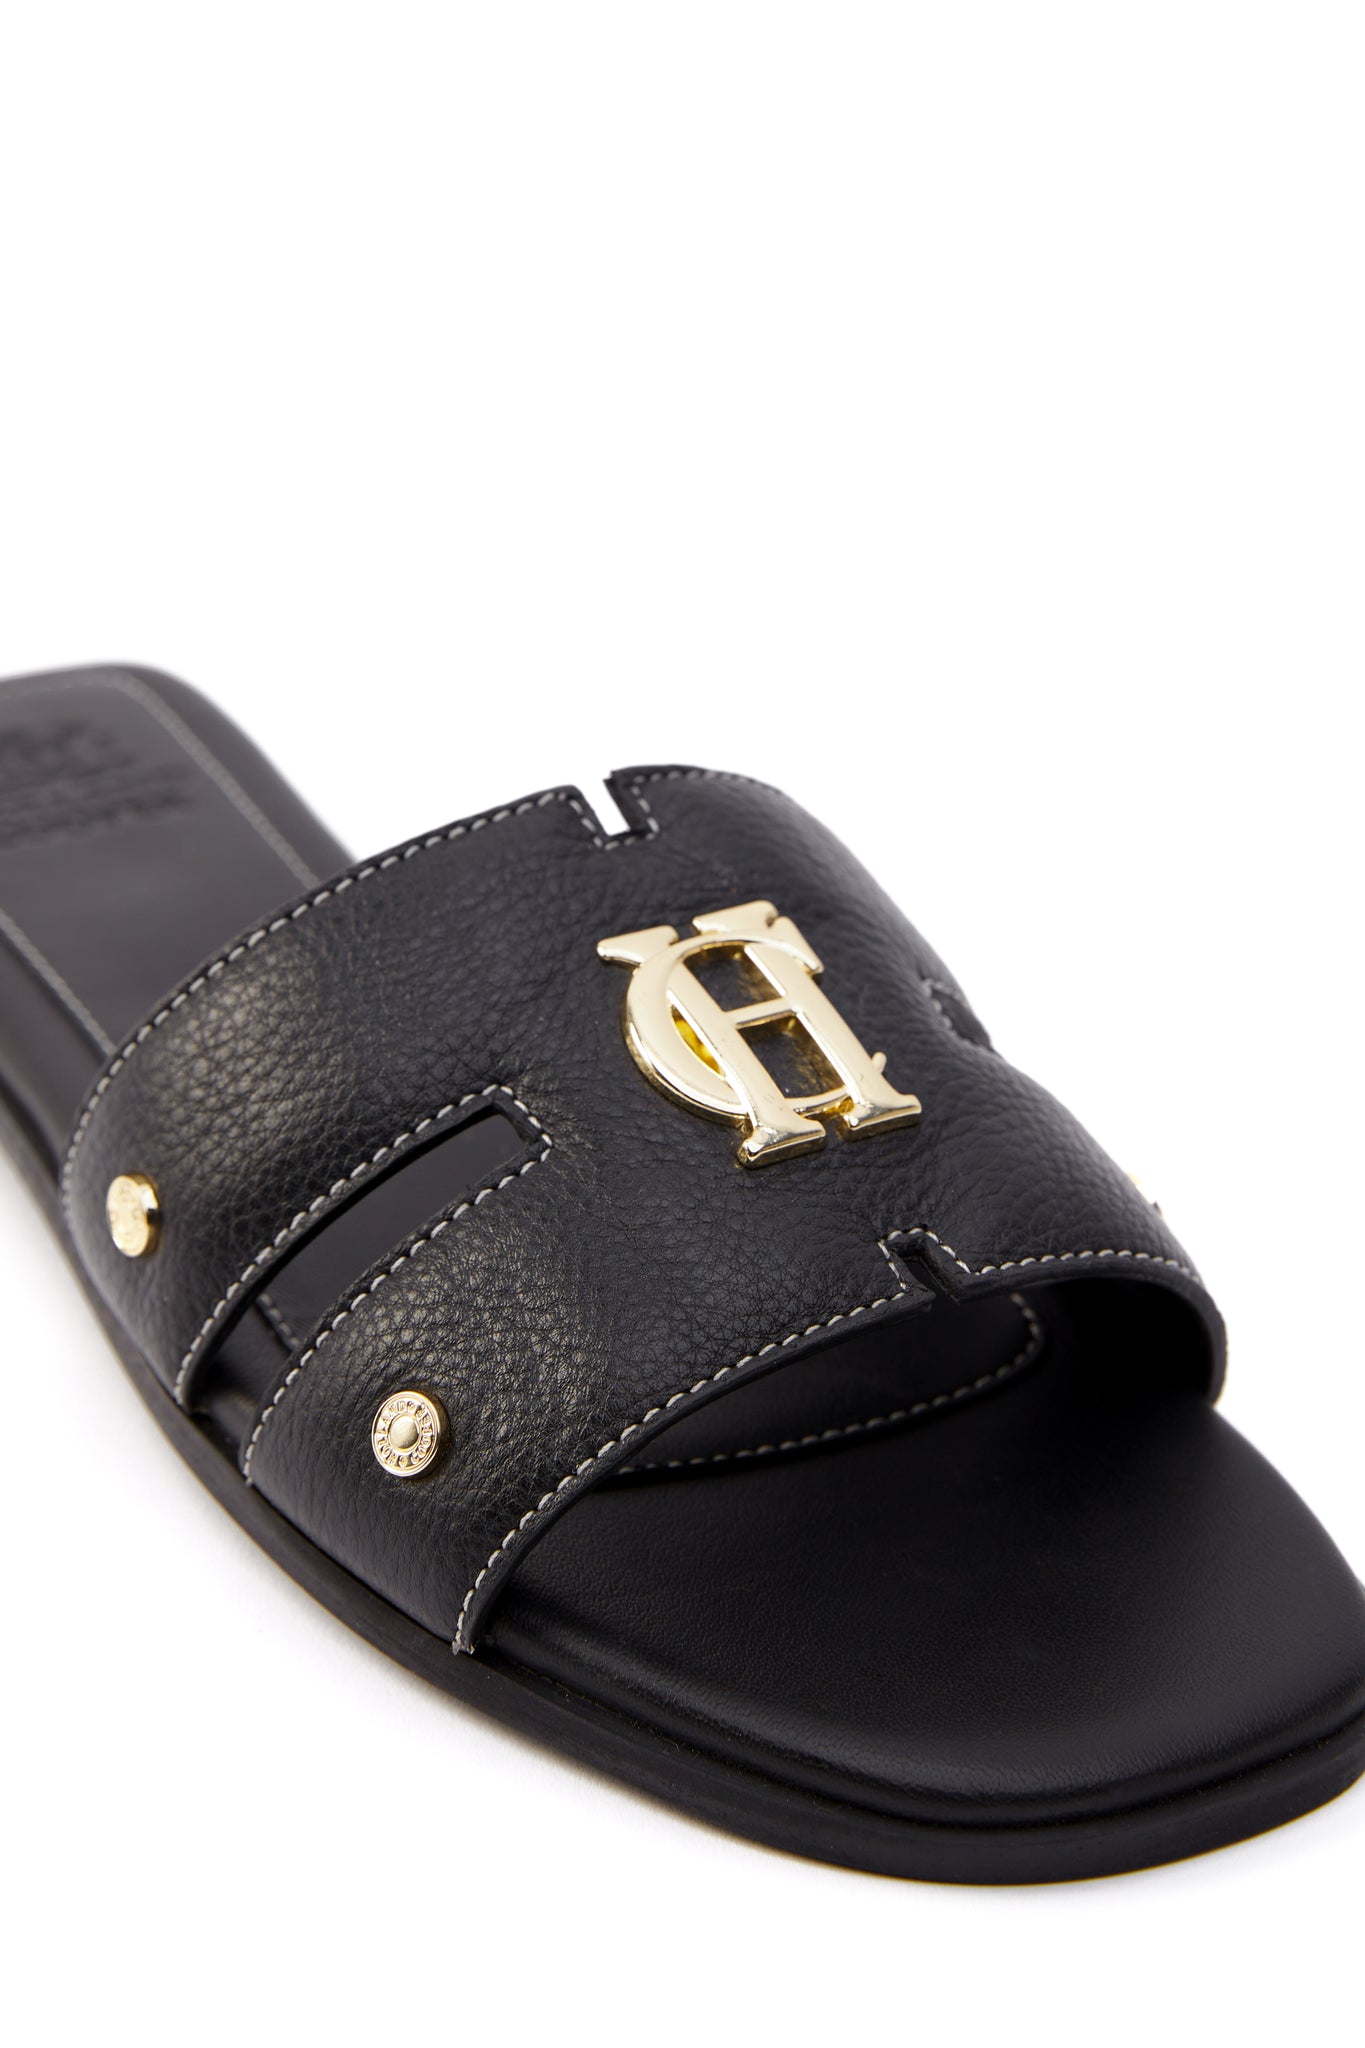 Close up of black leather sliders with contrast white stitching, a black leather sole and gold hardware